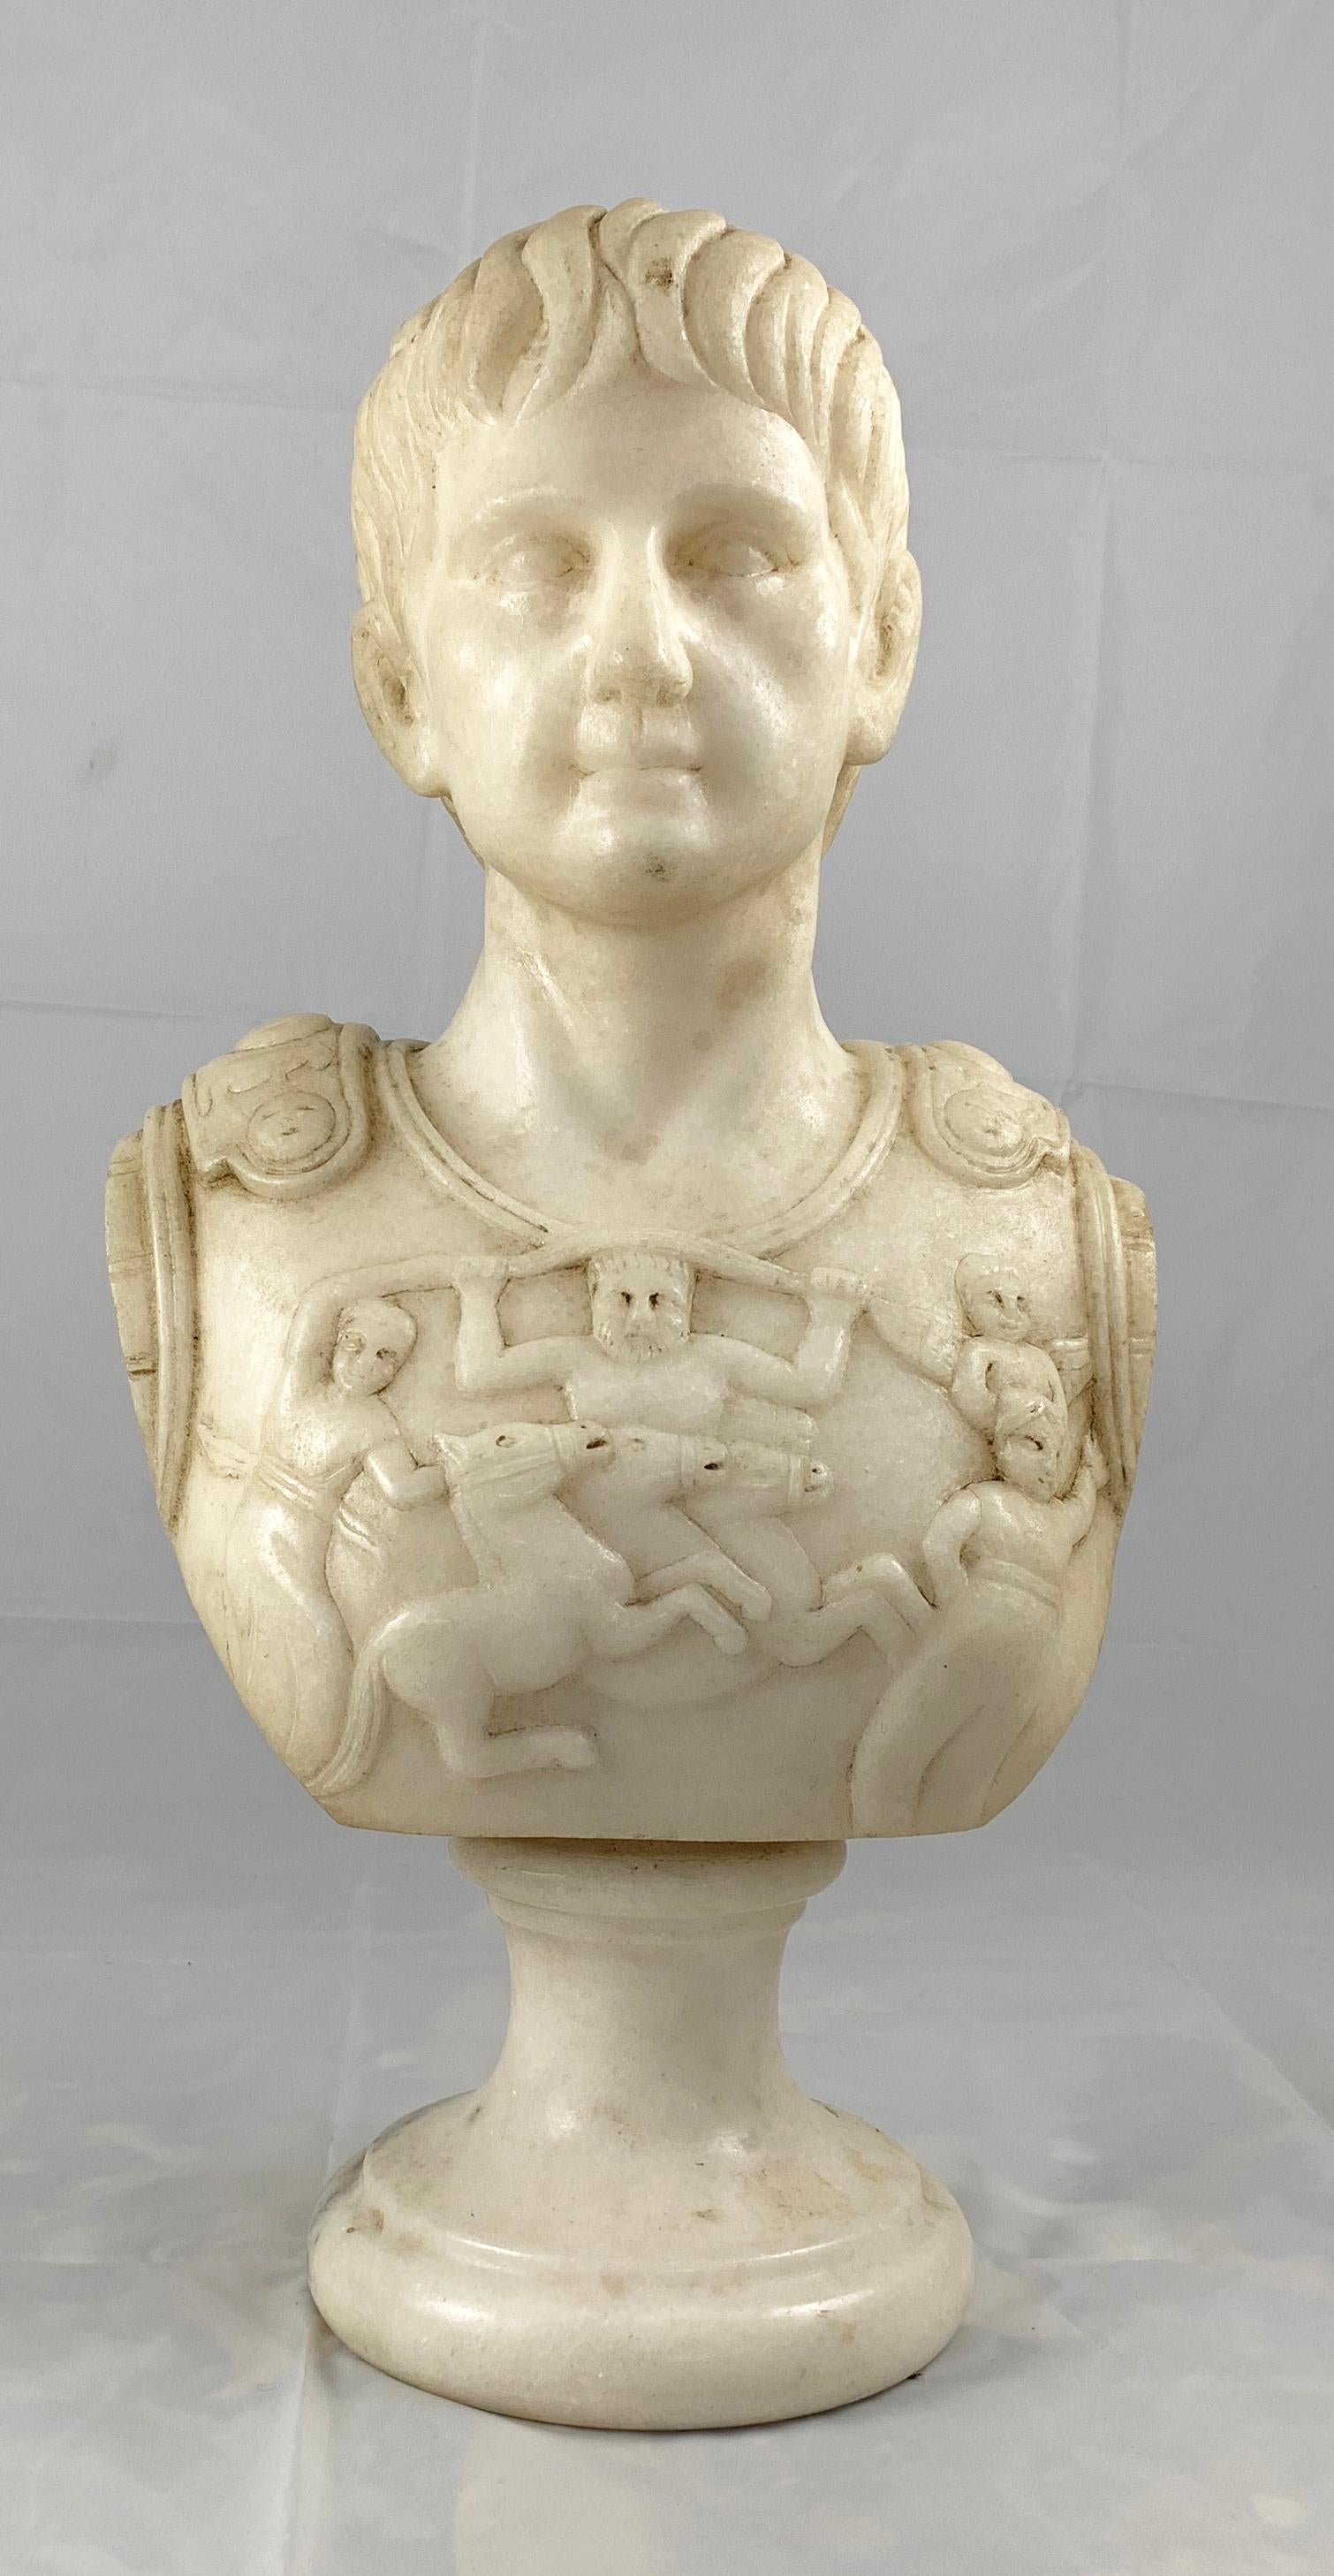 A fine white marble bust of a Roman General. Finely carved with an ornate breast plate and supported on a turned socle.